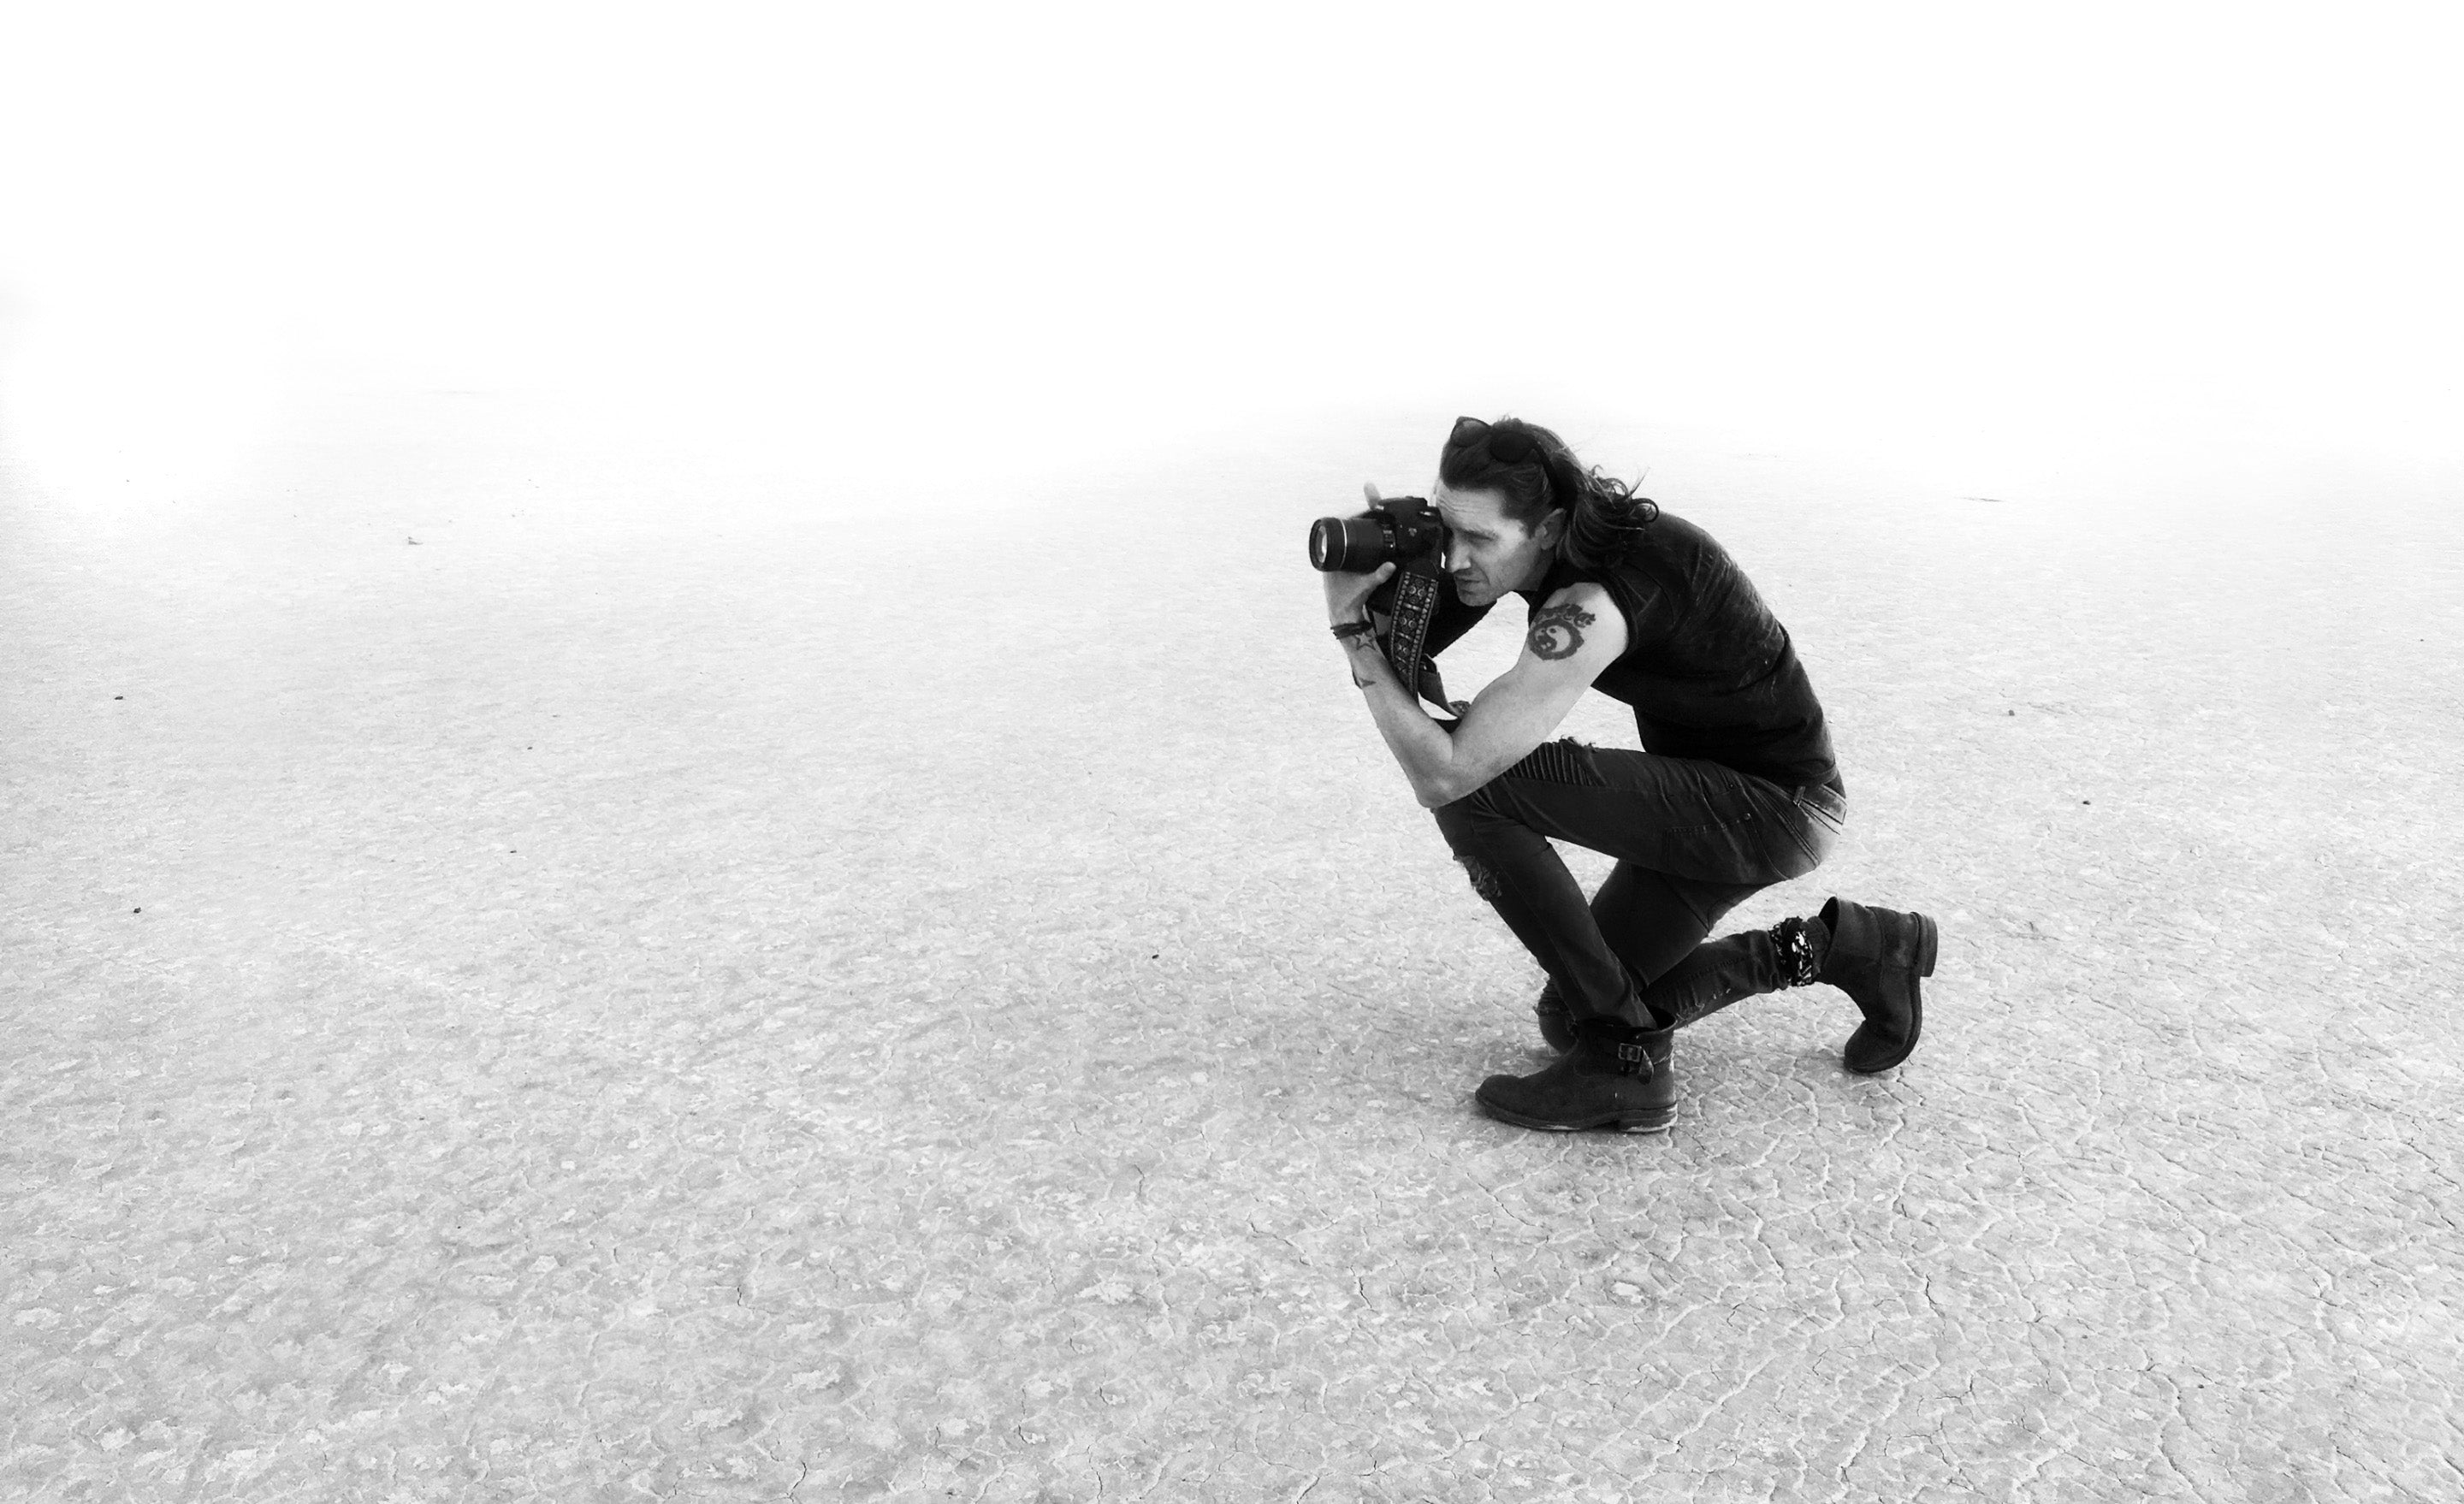 Fine art photographer Mark Maryanovich kneeling on dried lake bed floor looking through back of camera in black and white